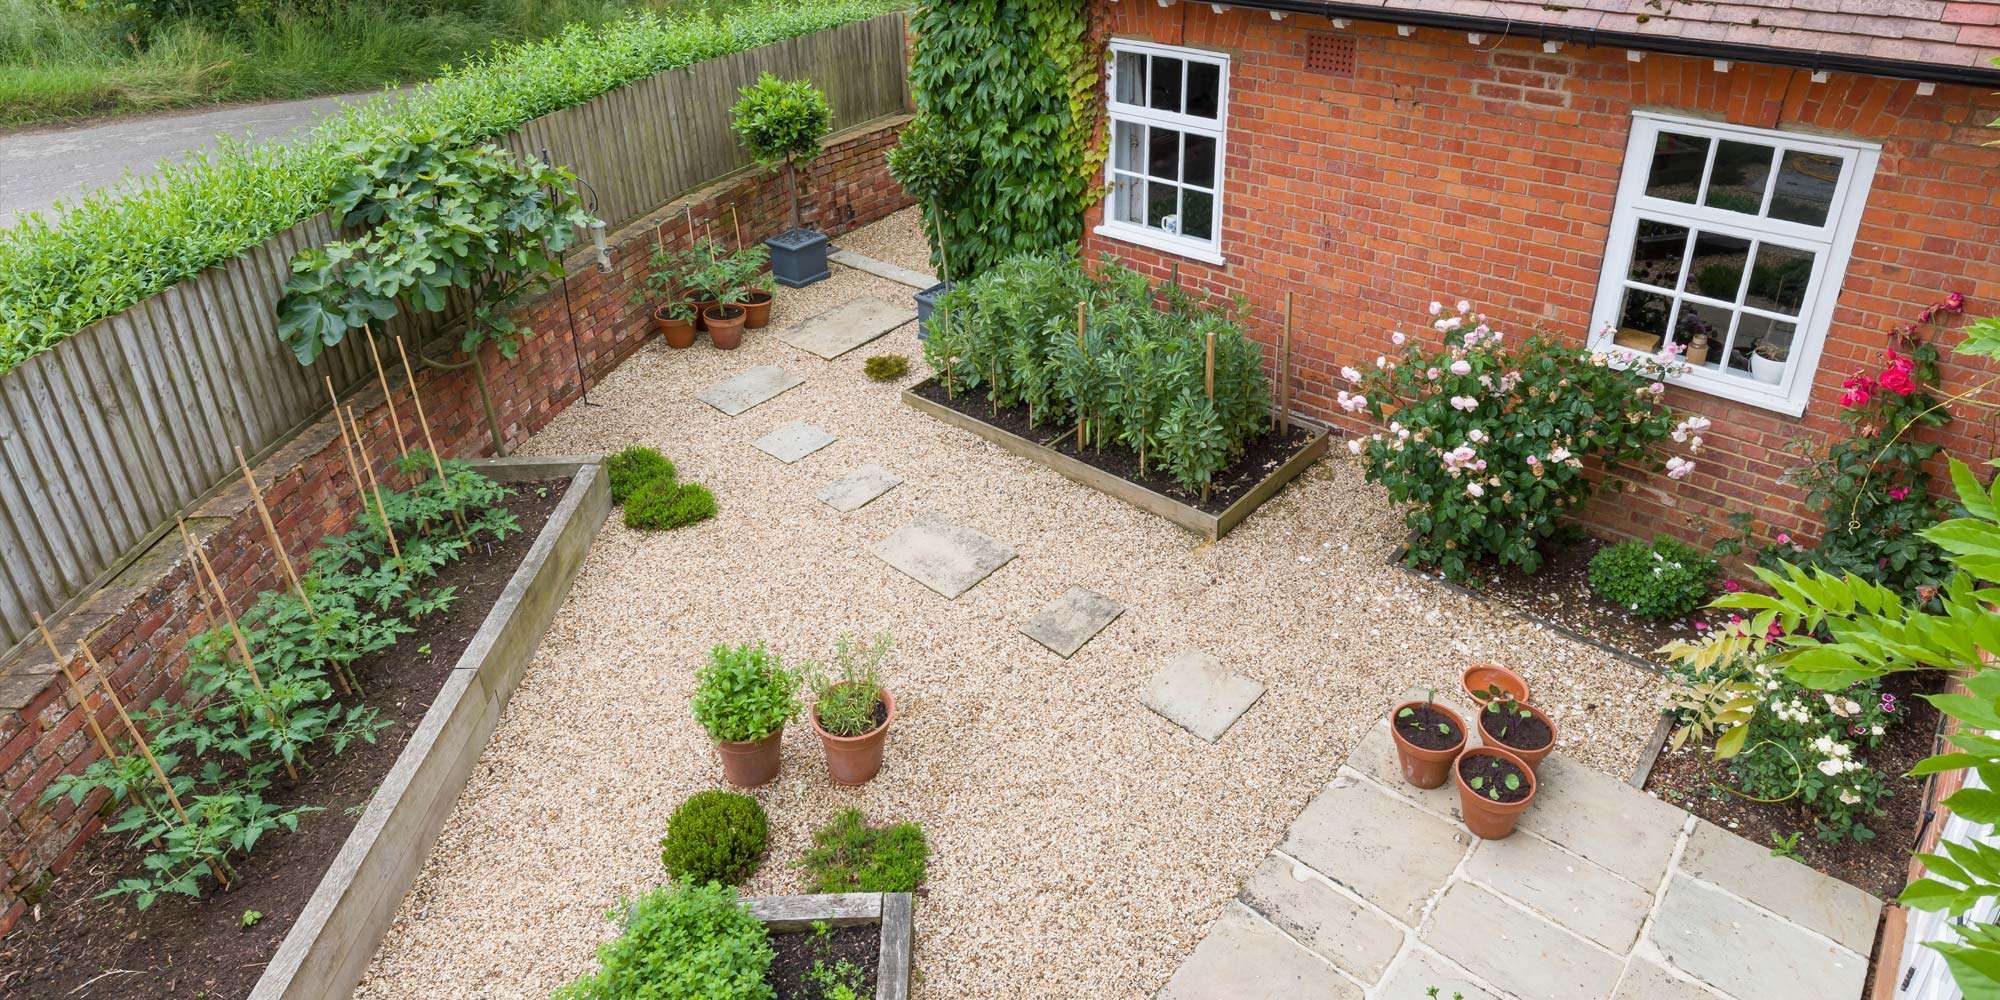 Landscapers in Solihull